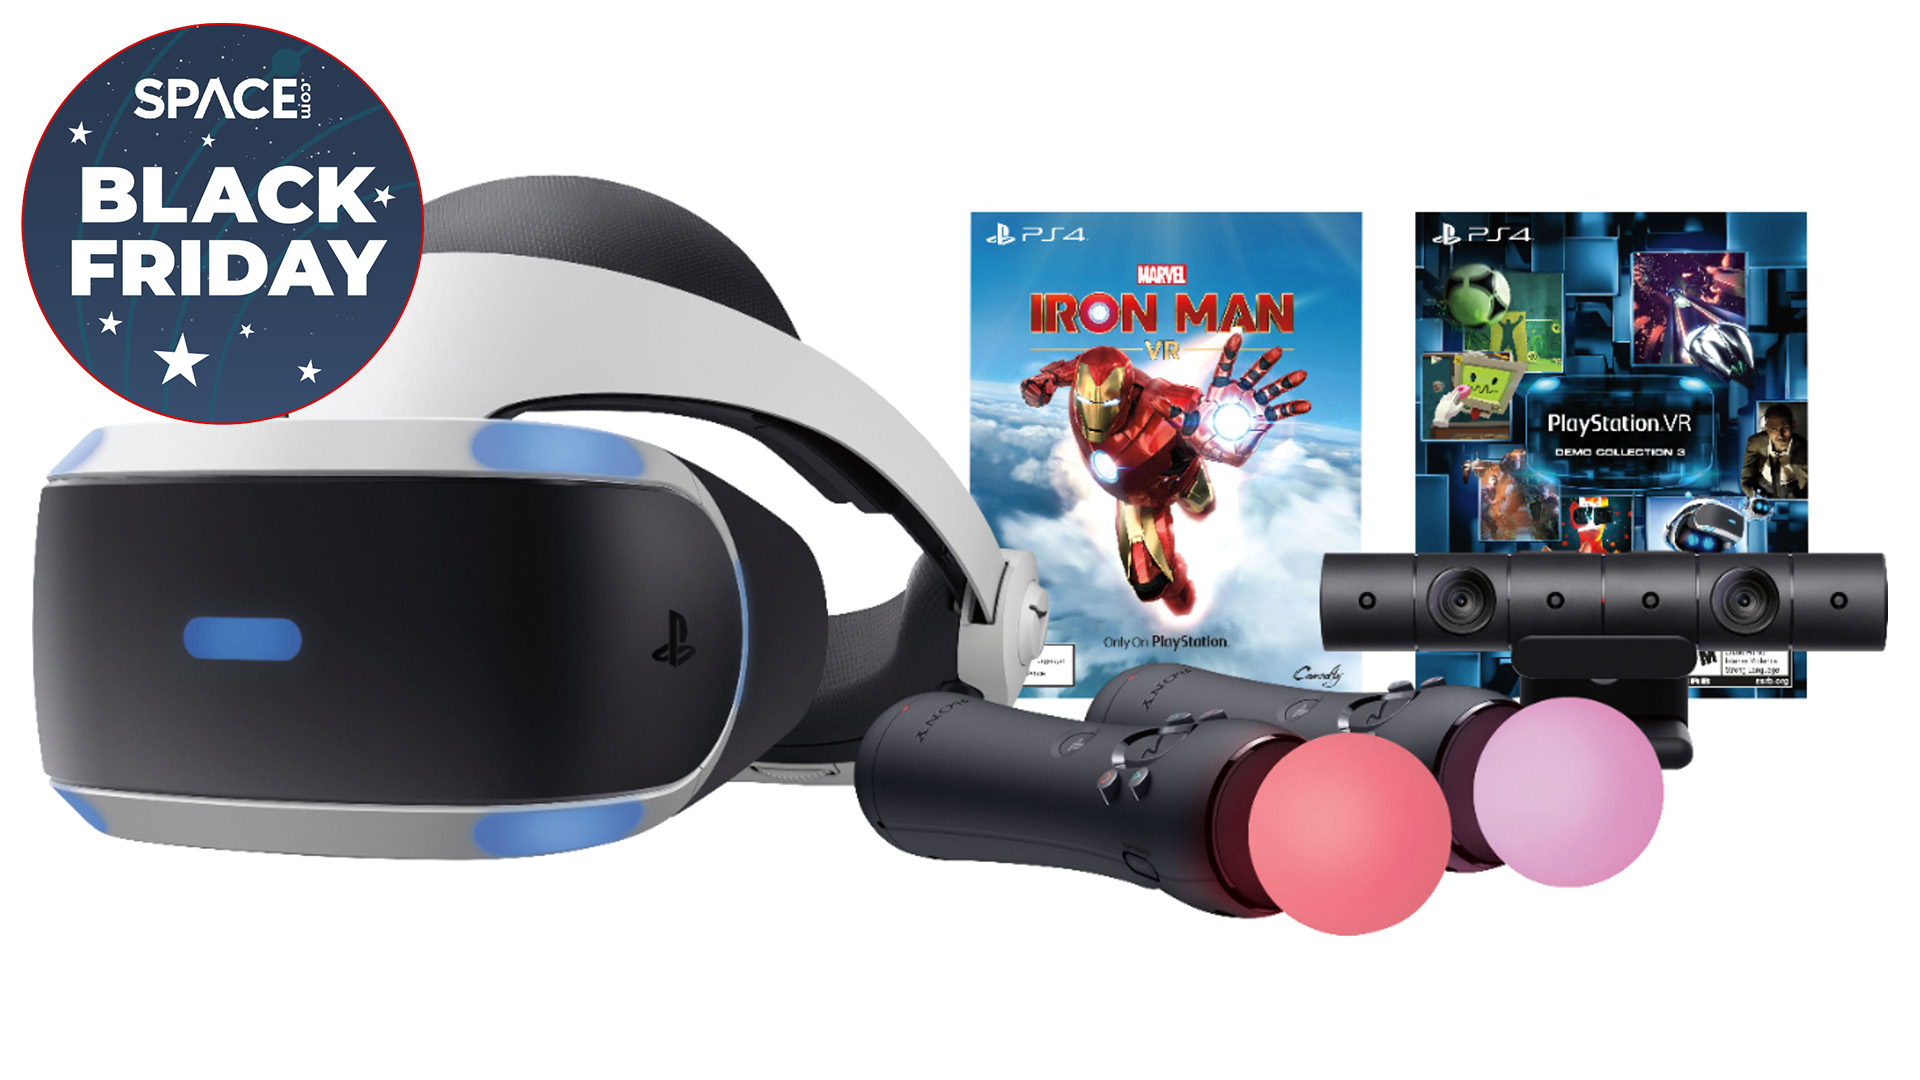 Gelijkenis Justitie Vriend Become a superhero with this Black Friday PlayStation VR deal | Space